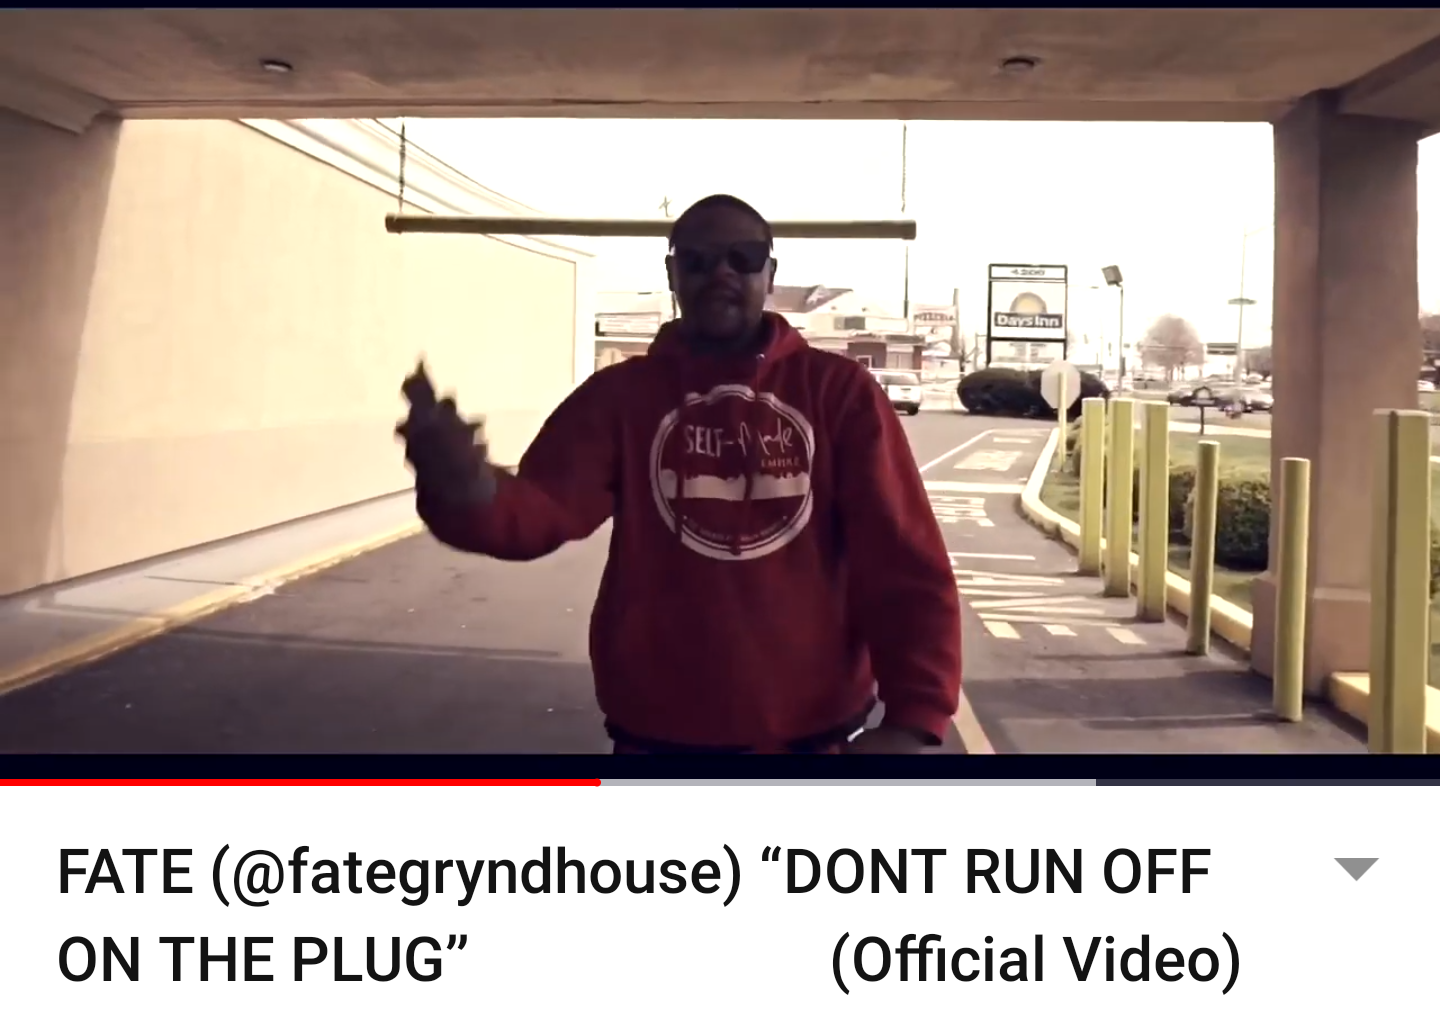 FATE (@fategryndhouse) “DONT RUN OFF ON THE PLUG” (Official Video)